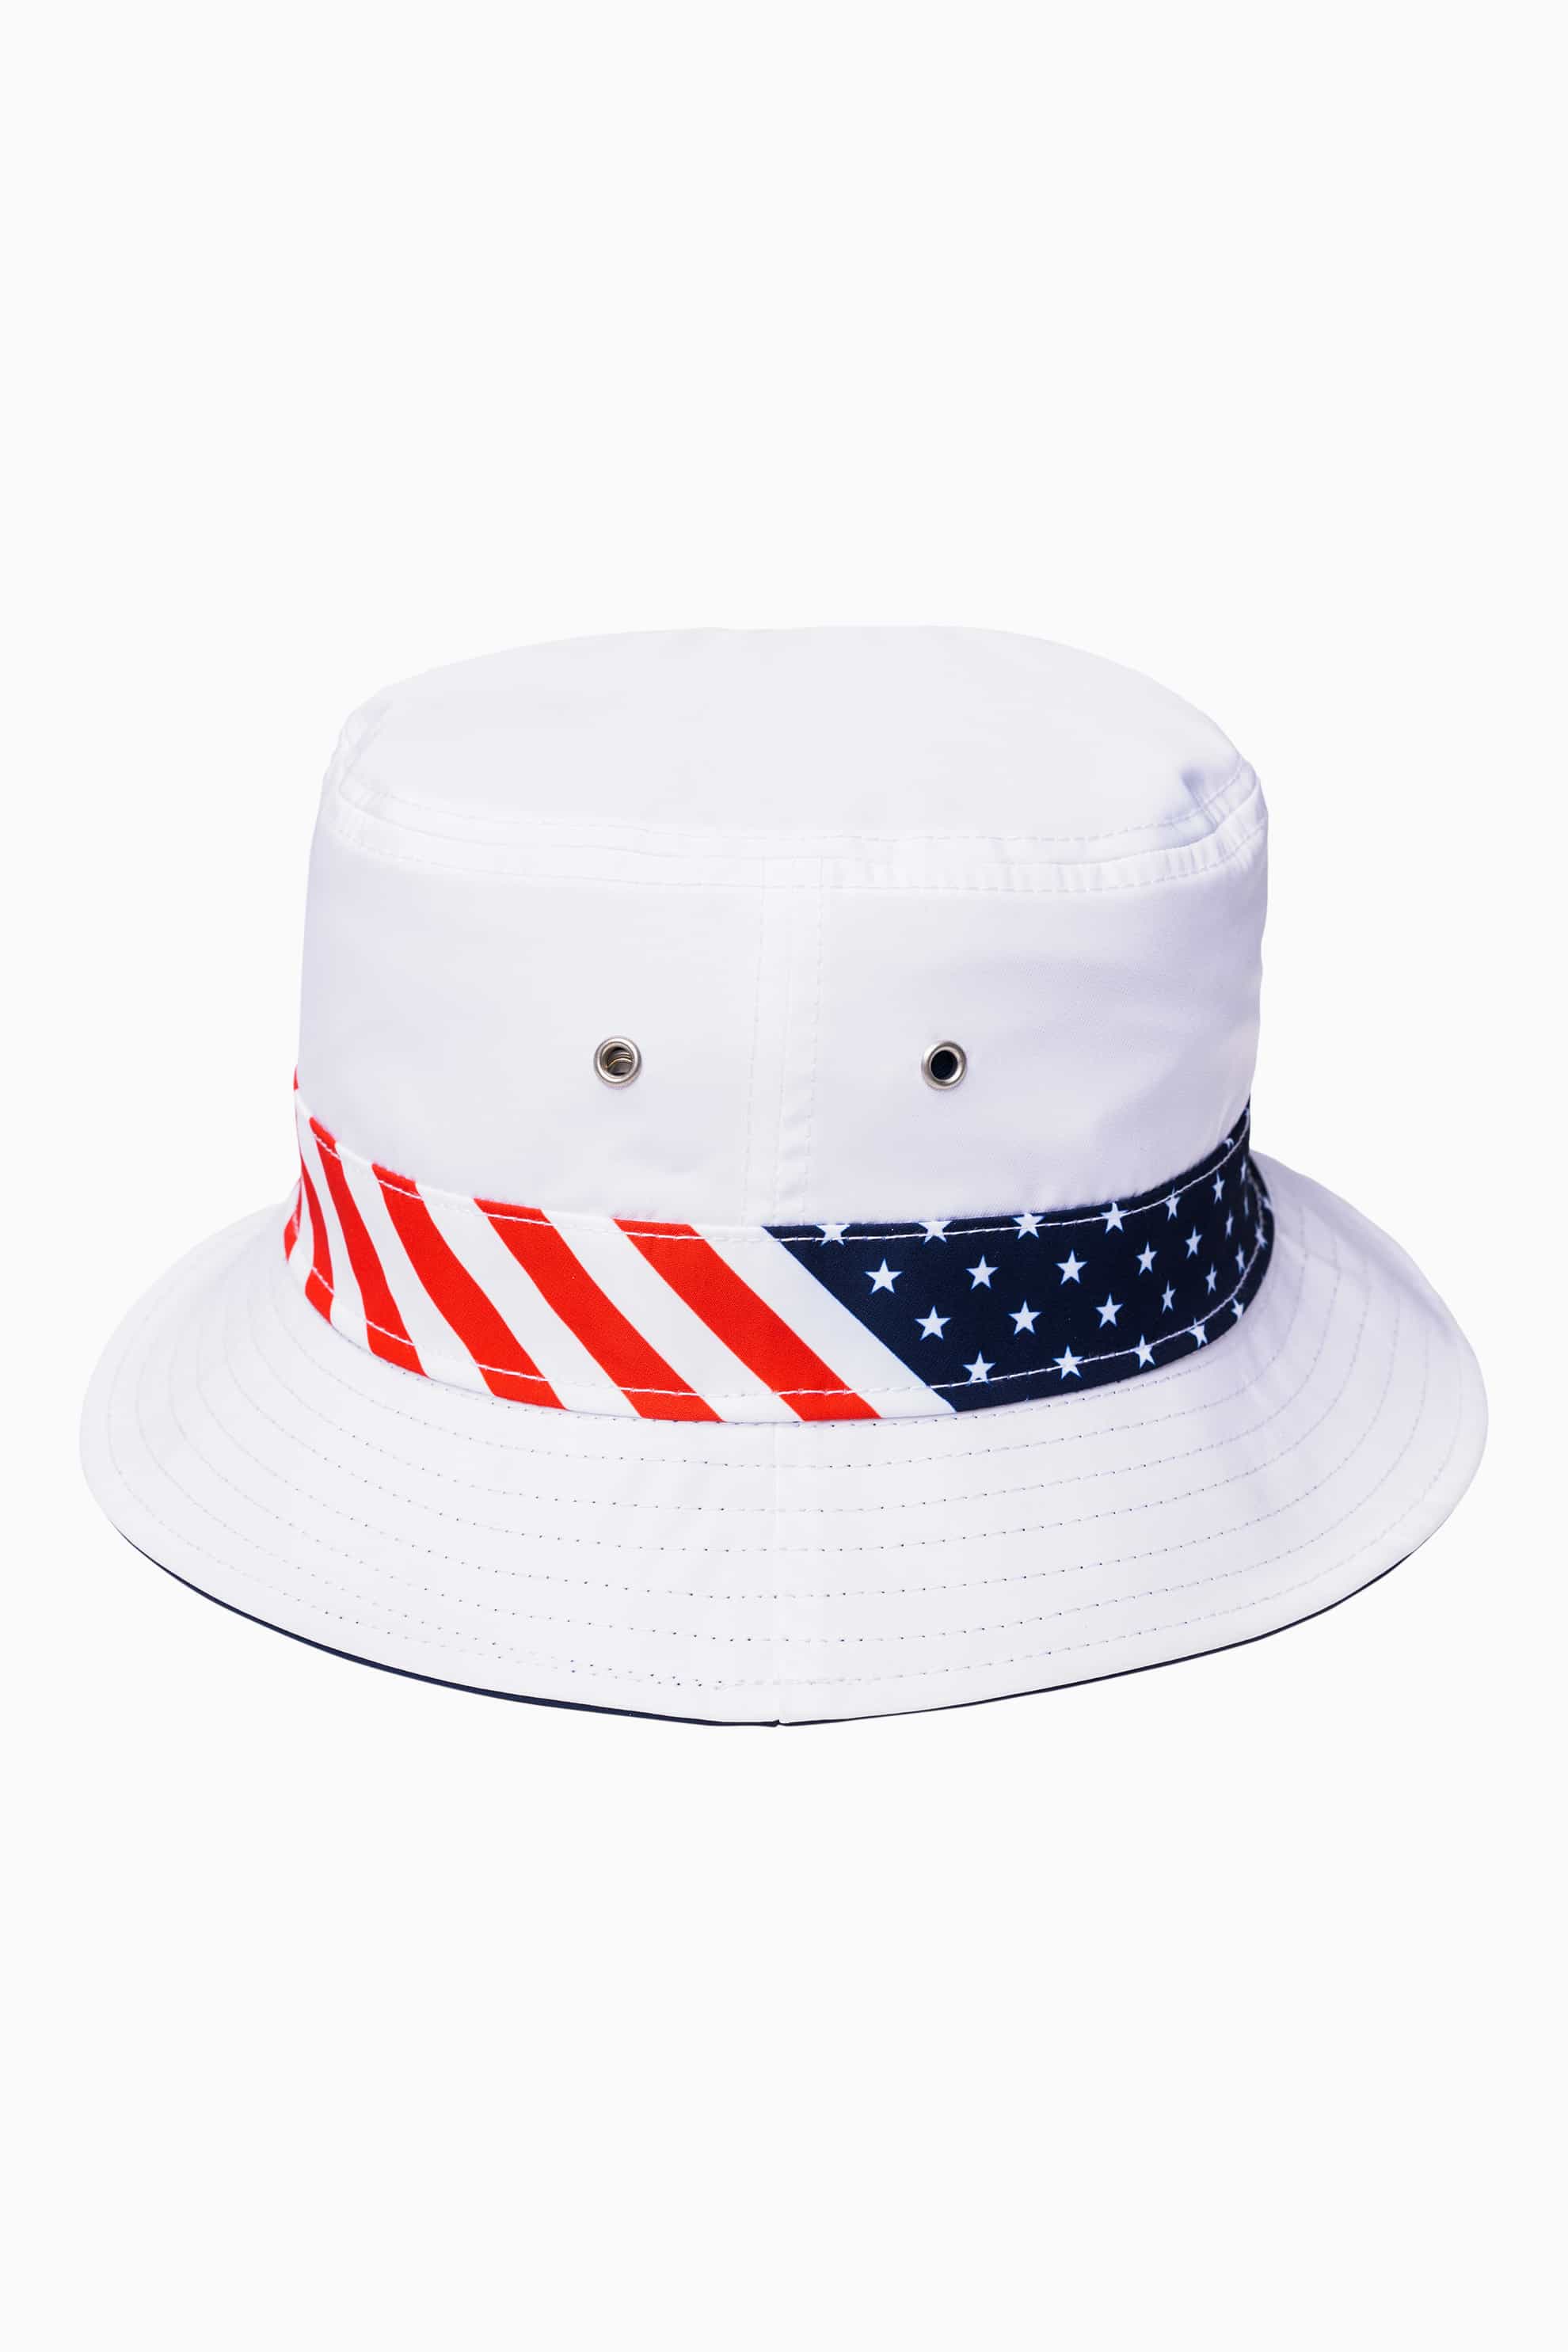 Americana Red White and Blue Stars Reversible Bucket Hats - 3 Pack